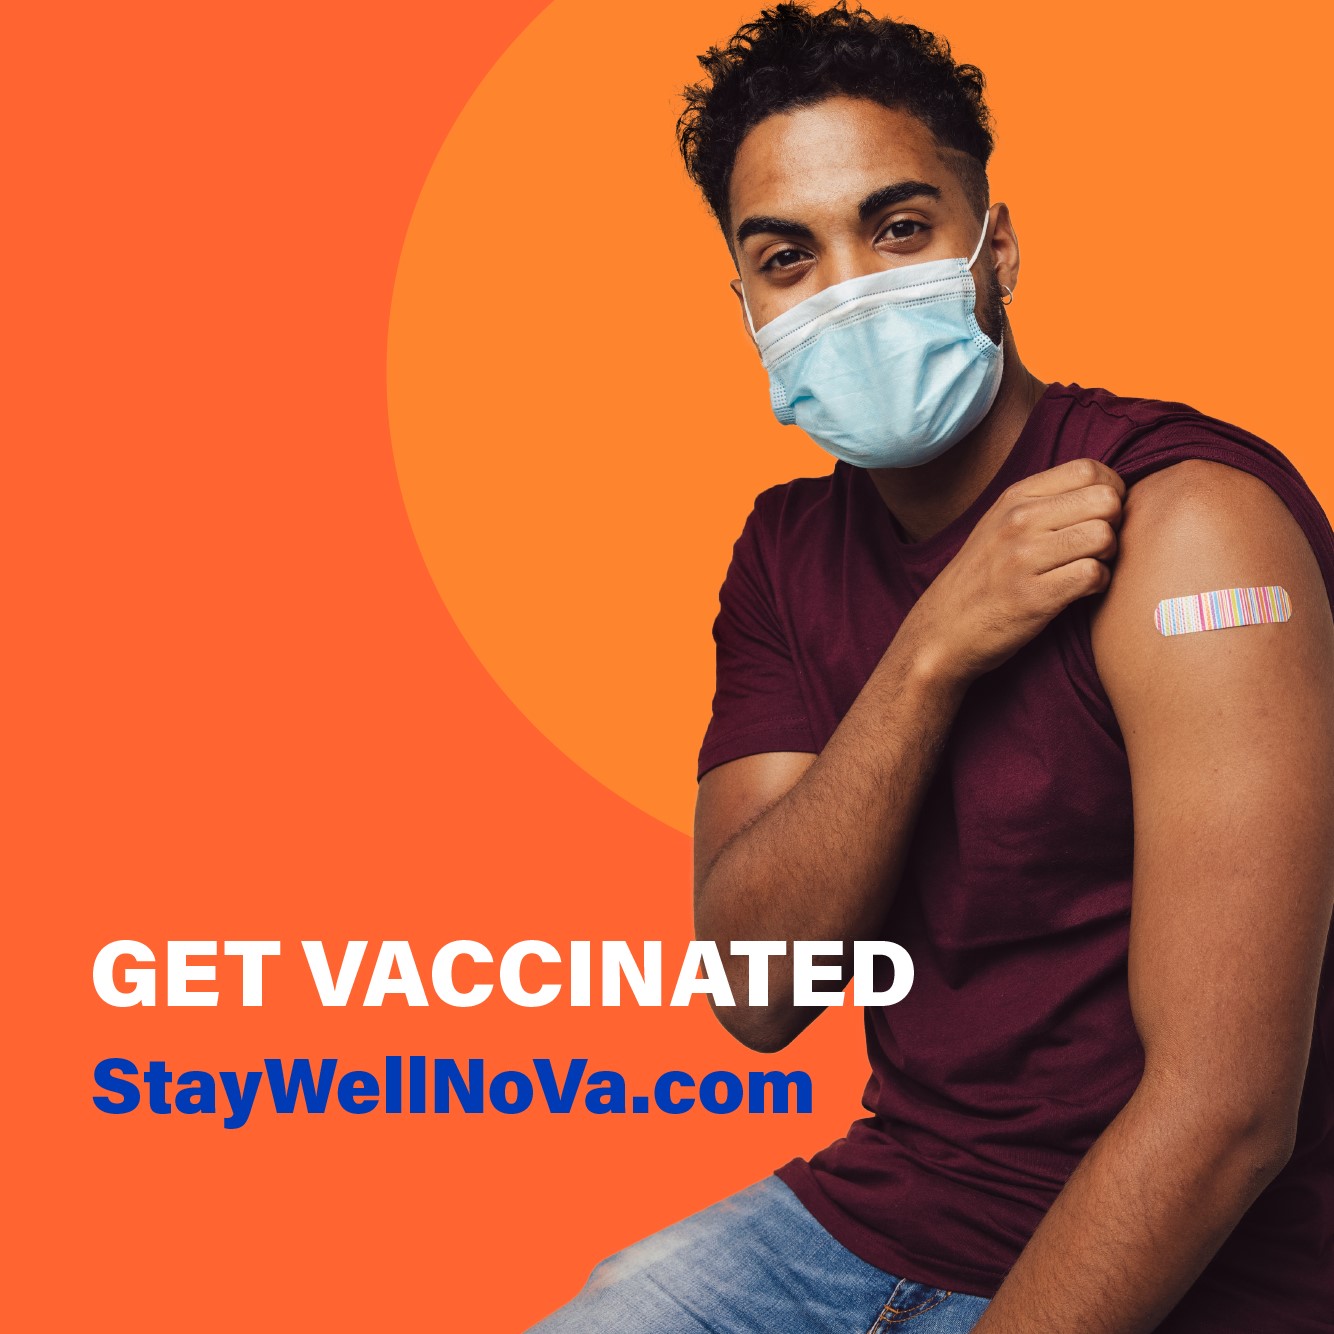 StayWellNova campaign image young man